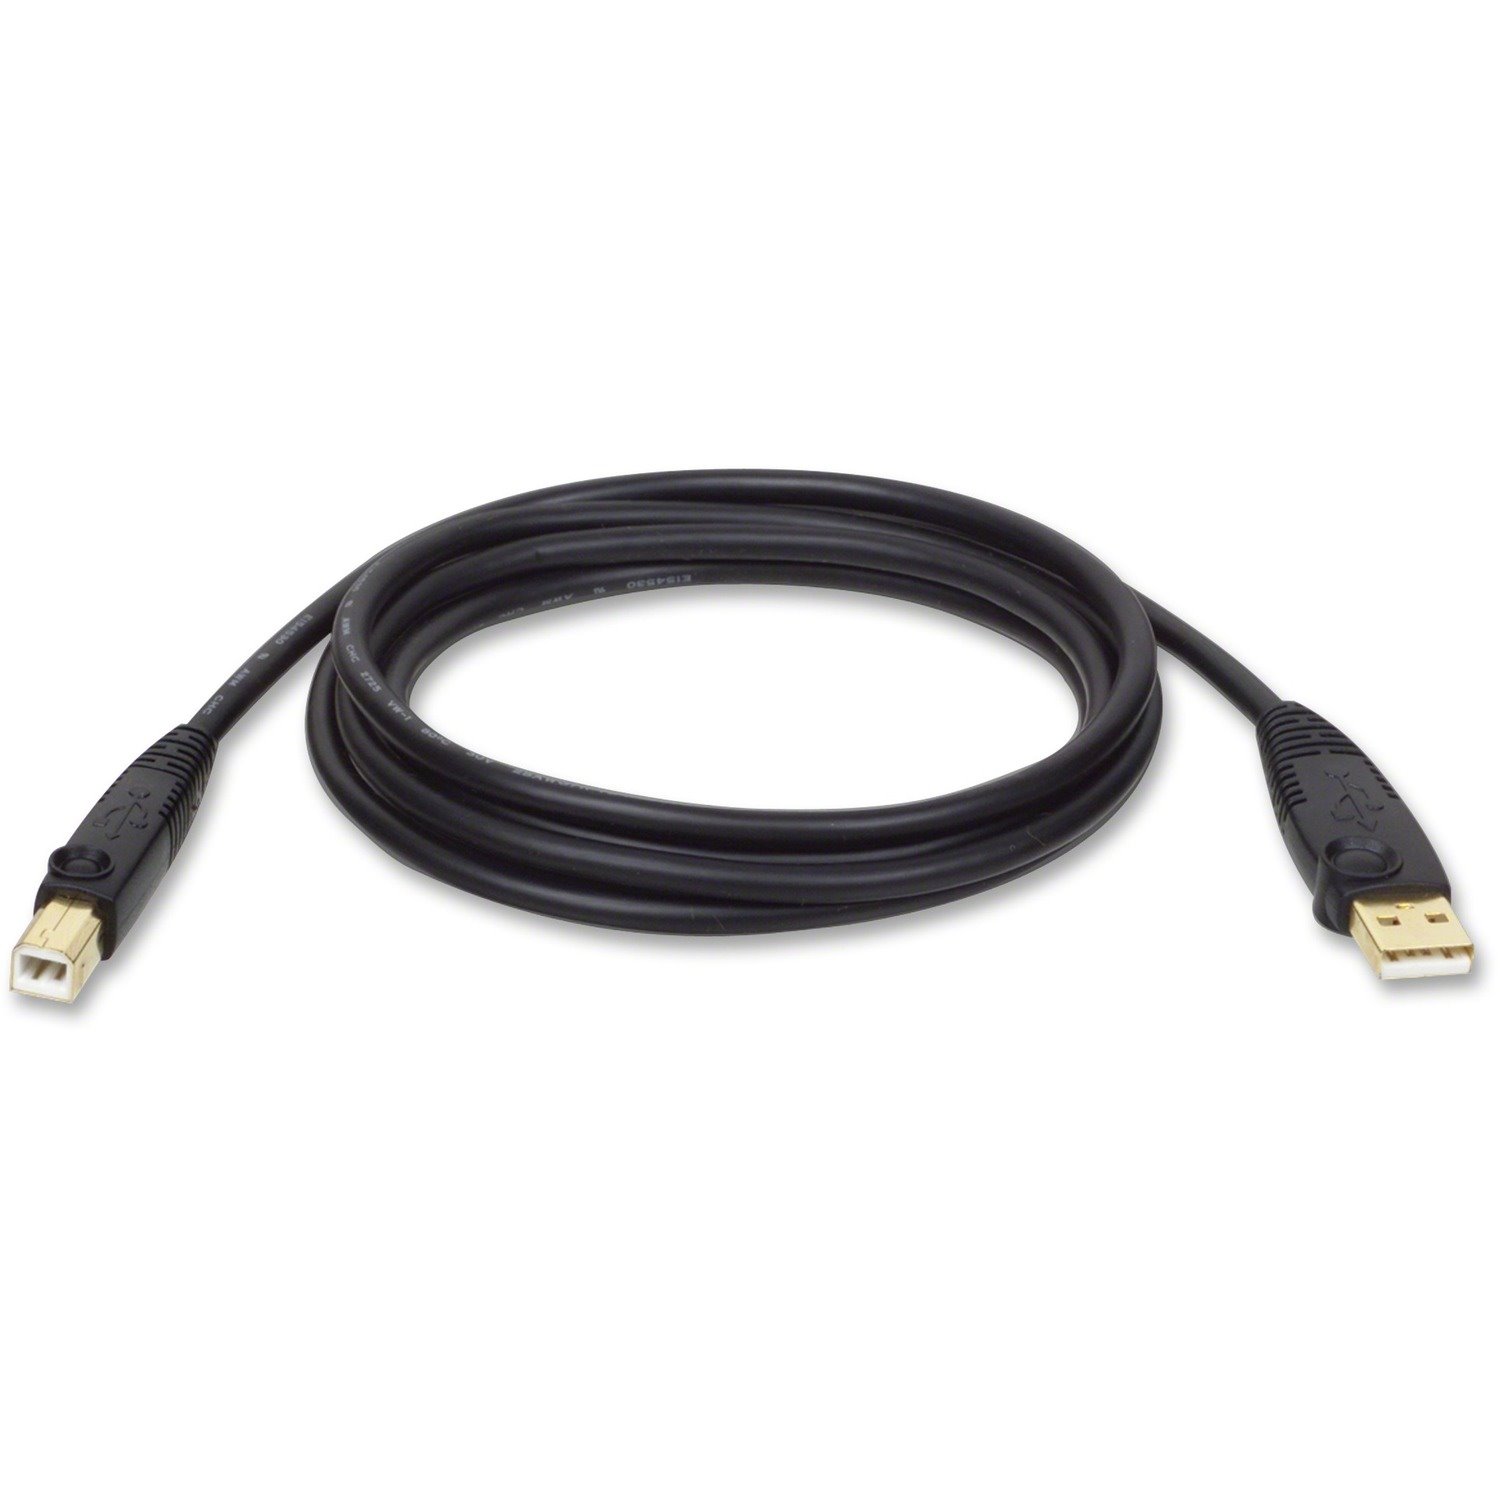 Tripp Lite 10ft USB 2.0 Hi-Speed A/B Device Cable Shielded M/M